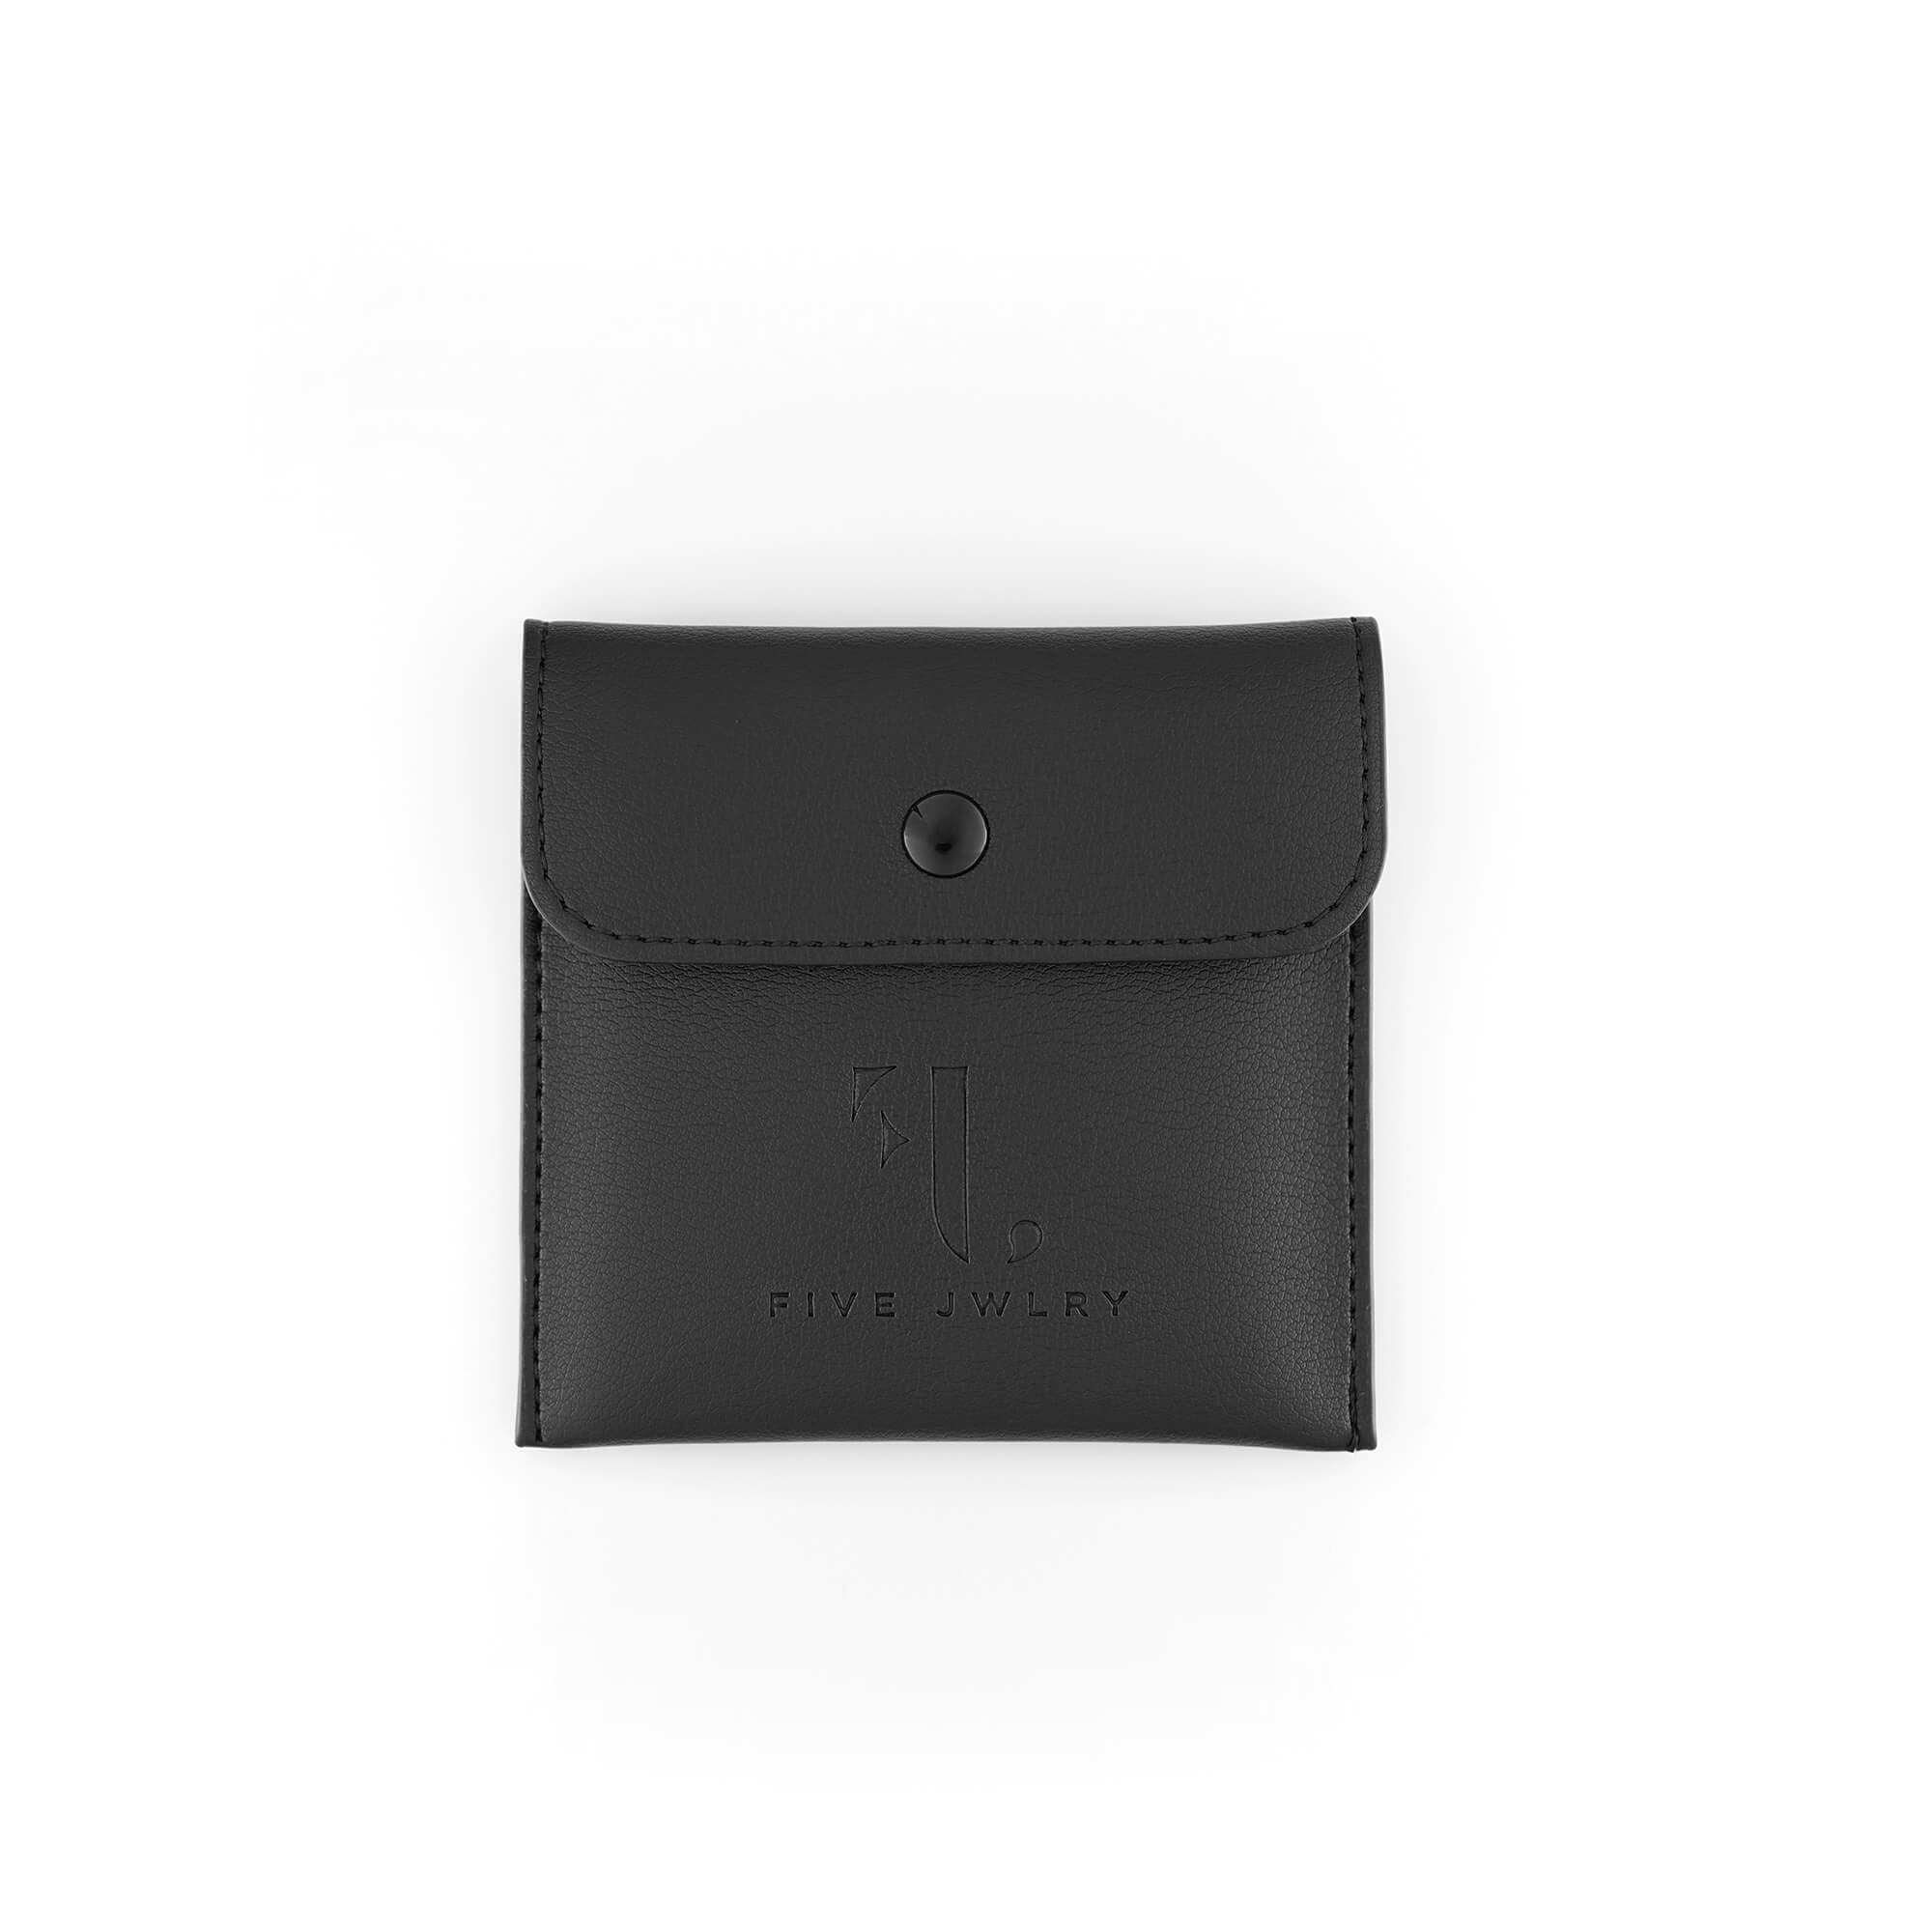 Black square leather pouch from Five Jwlry, designed specifically for storing jewelry.